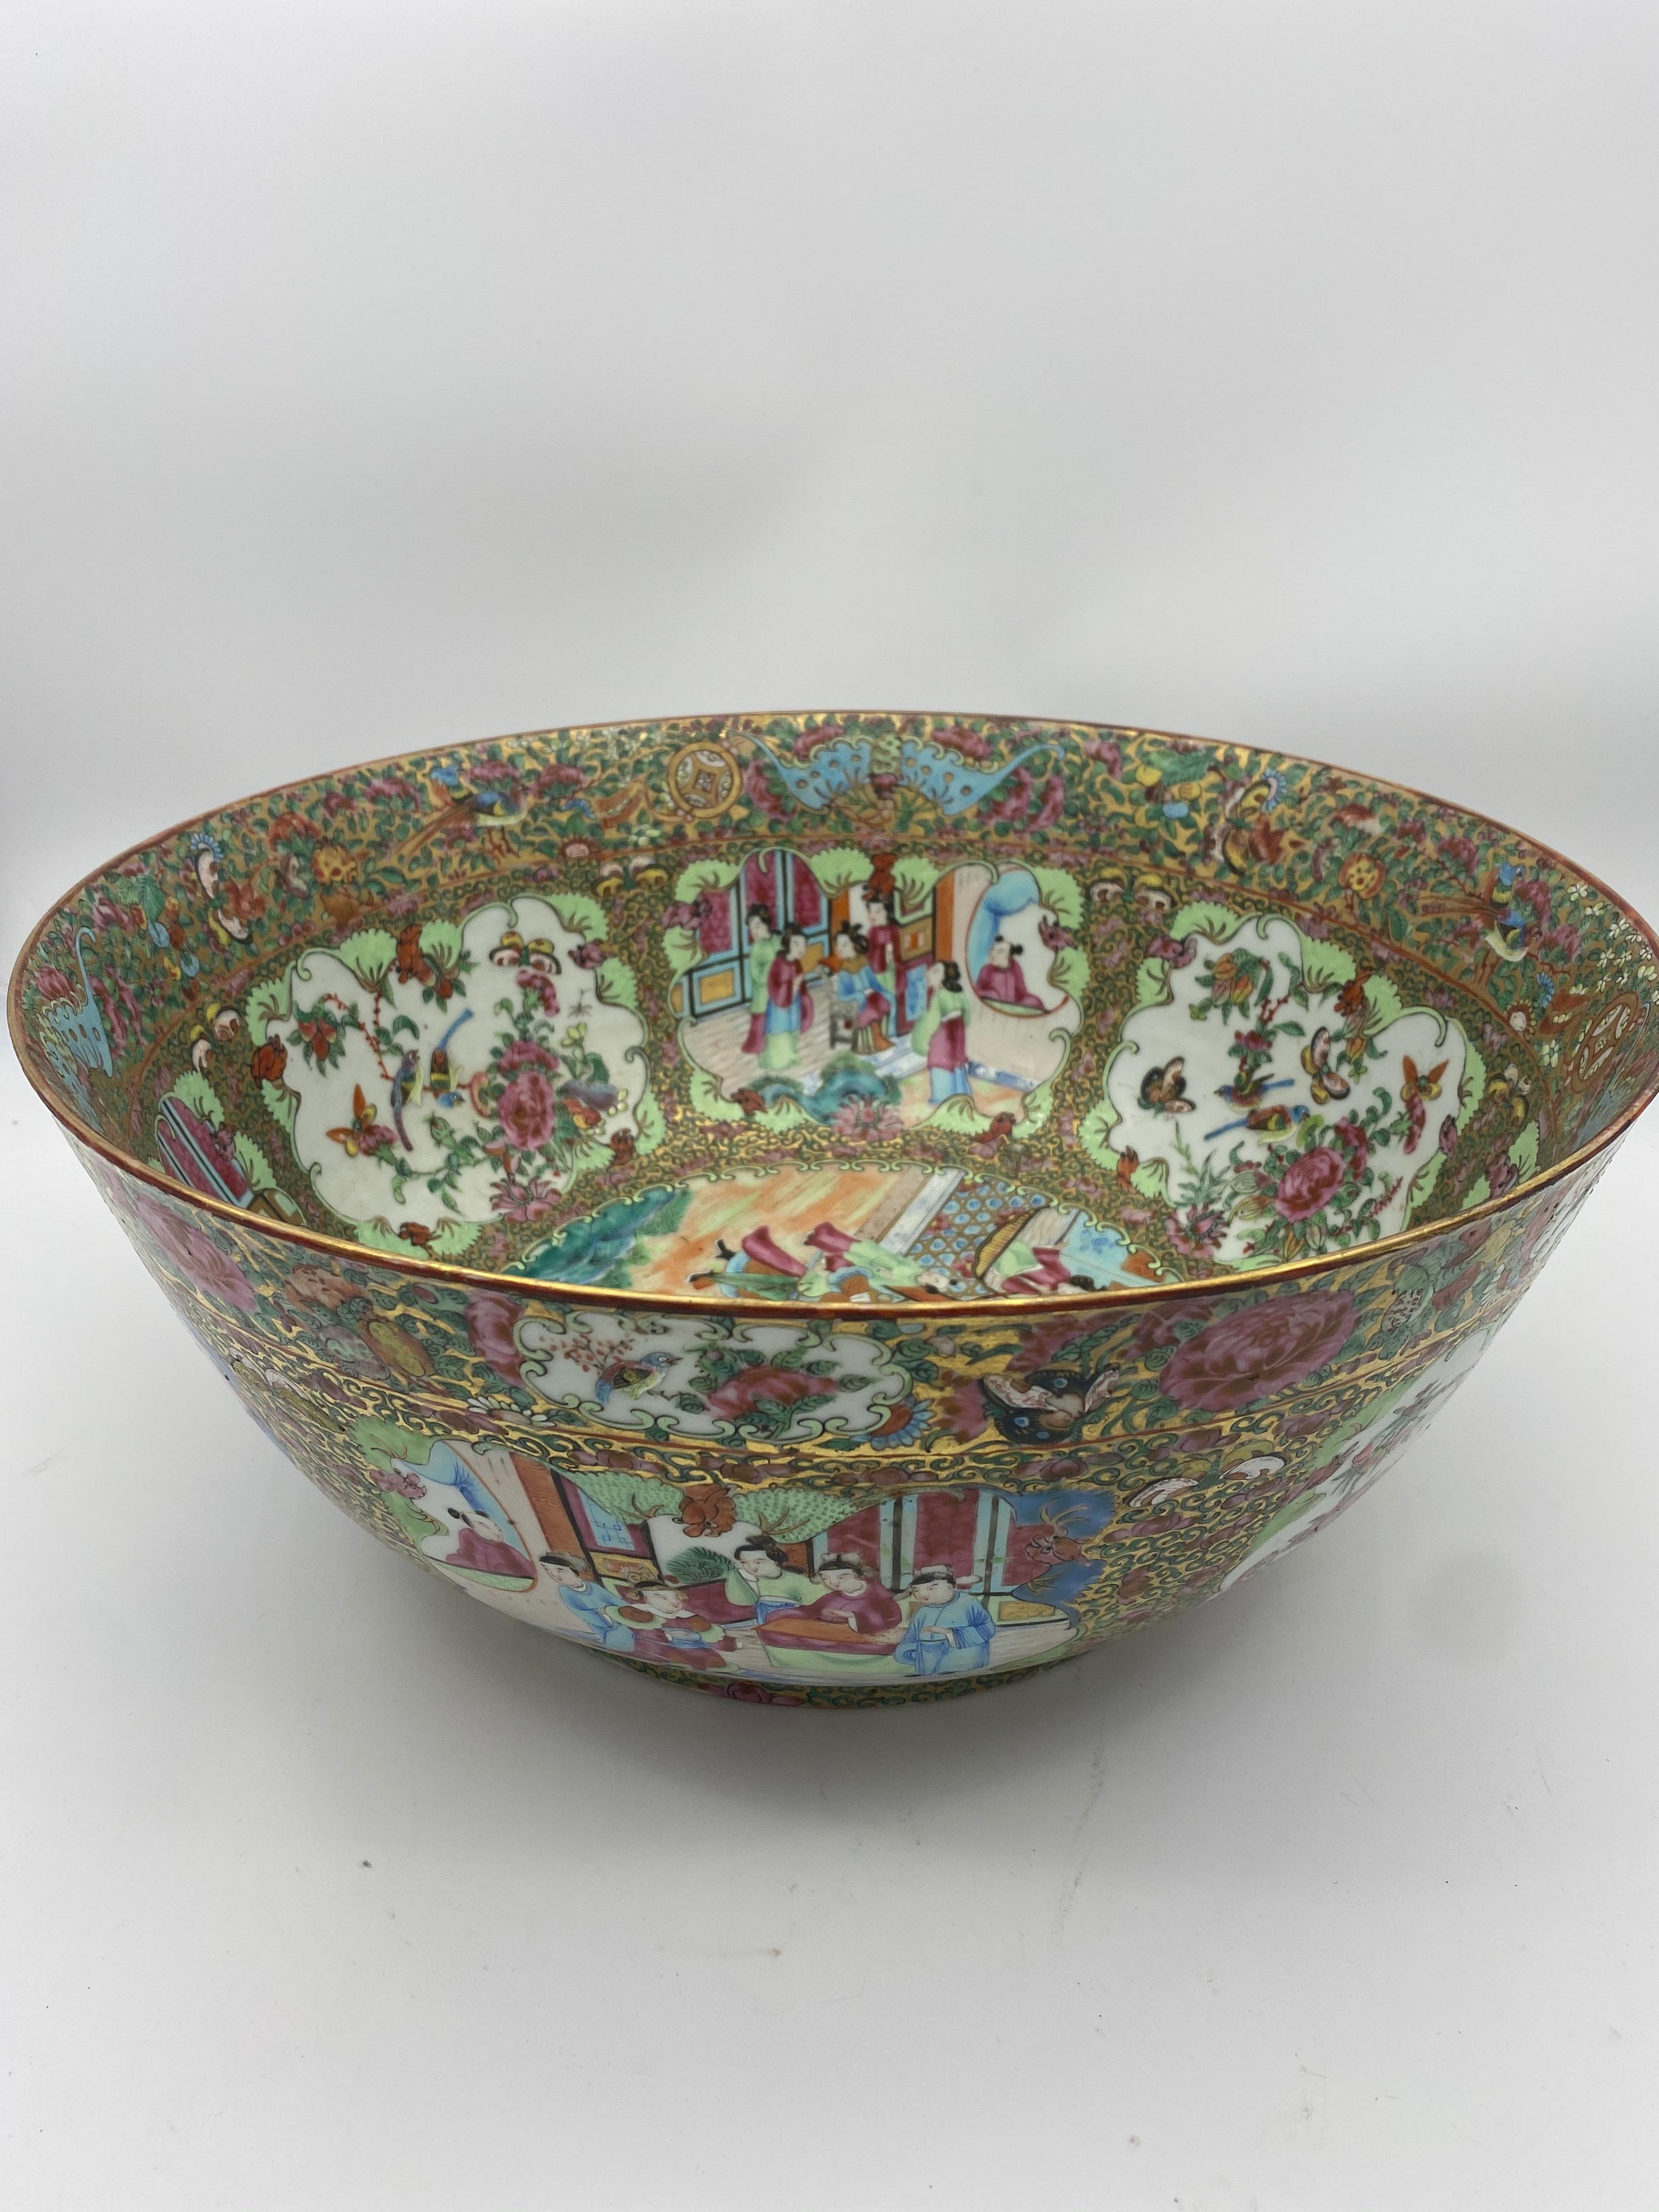 19th Century Chinese Famille Rose Porcelain Large Bowl In Good Condition For Sale In Brea, CA